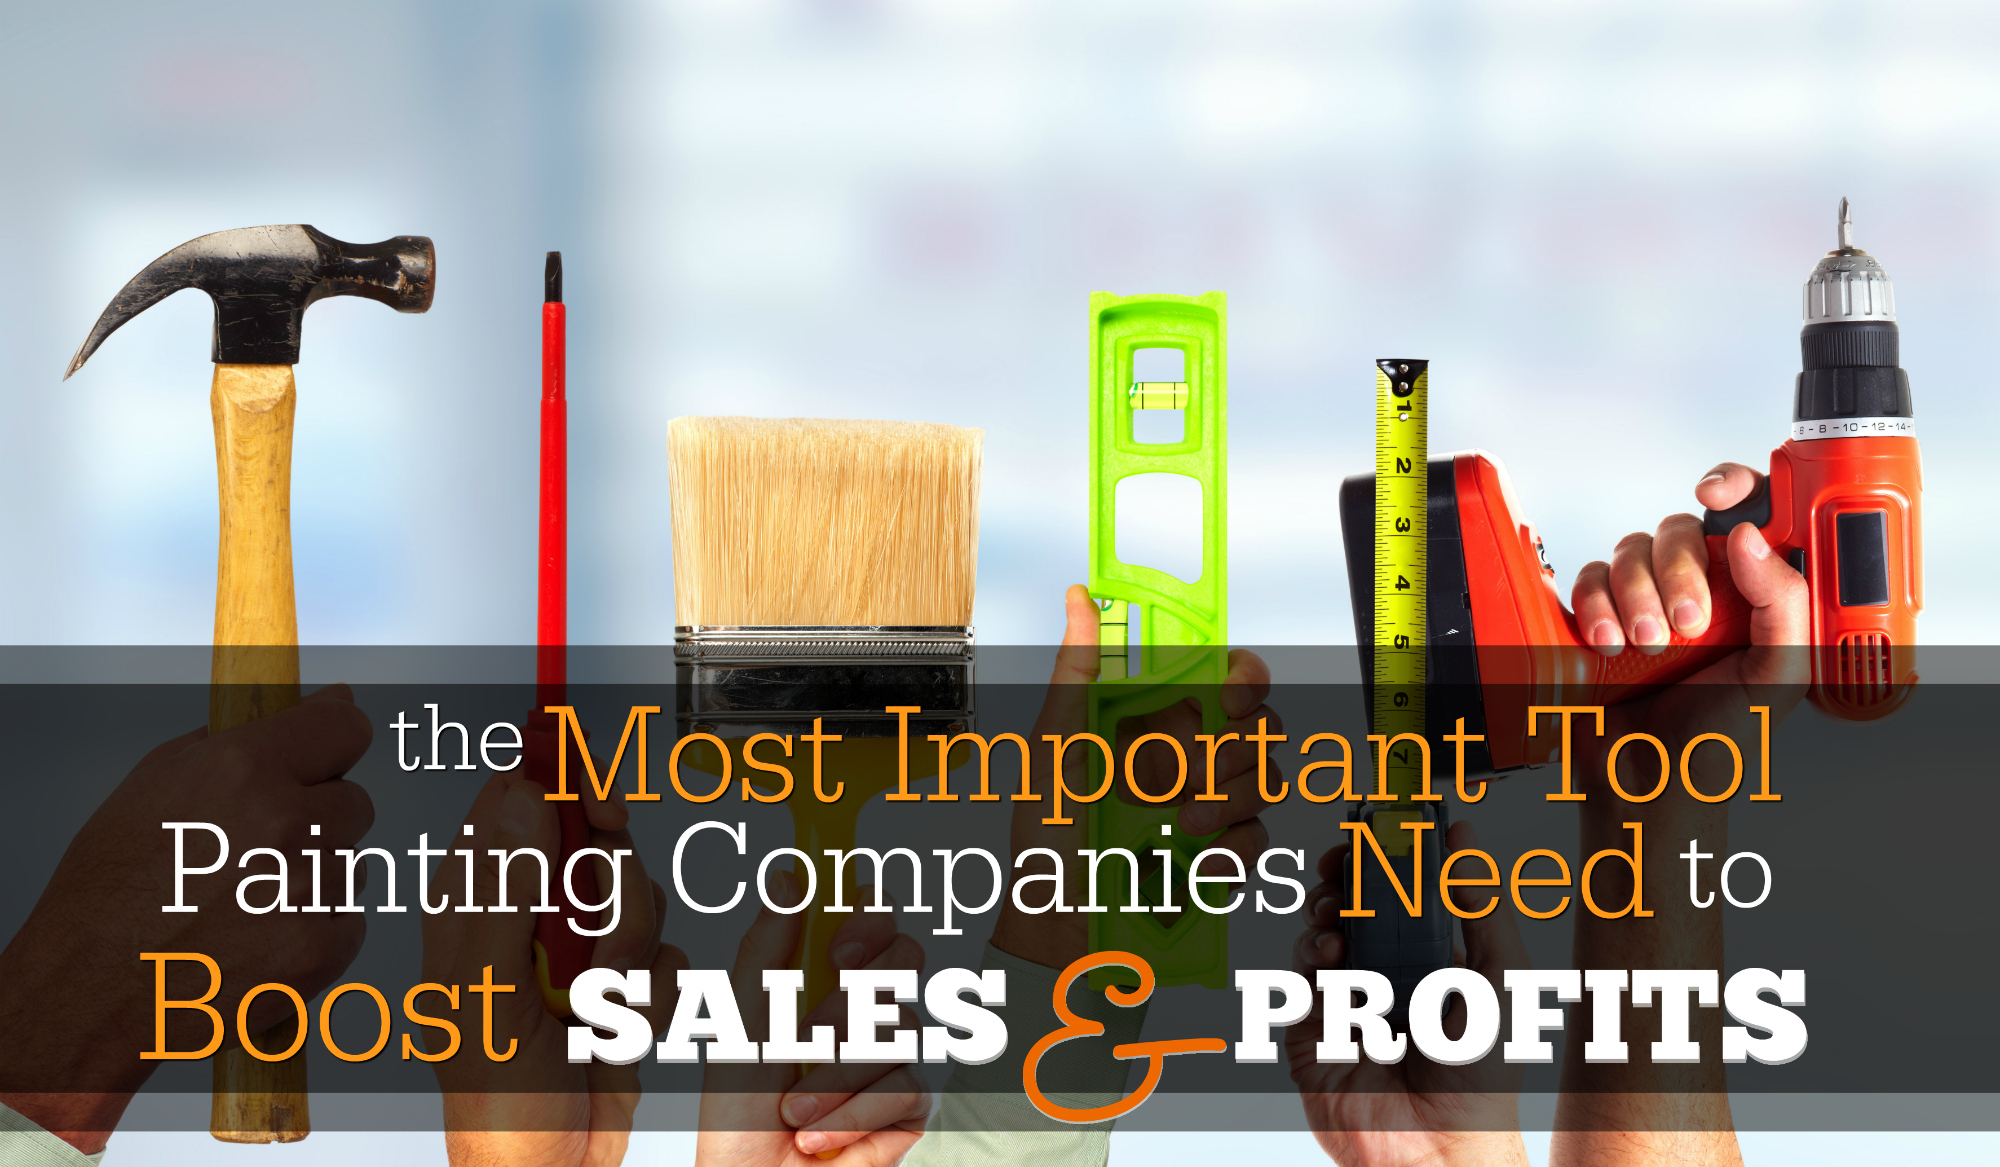 Painting Company Sales Tools